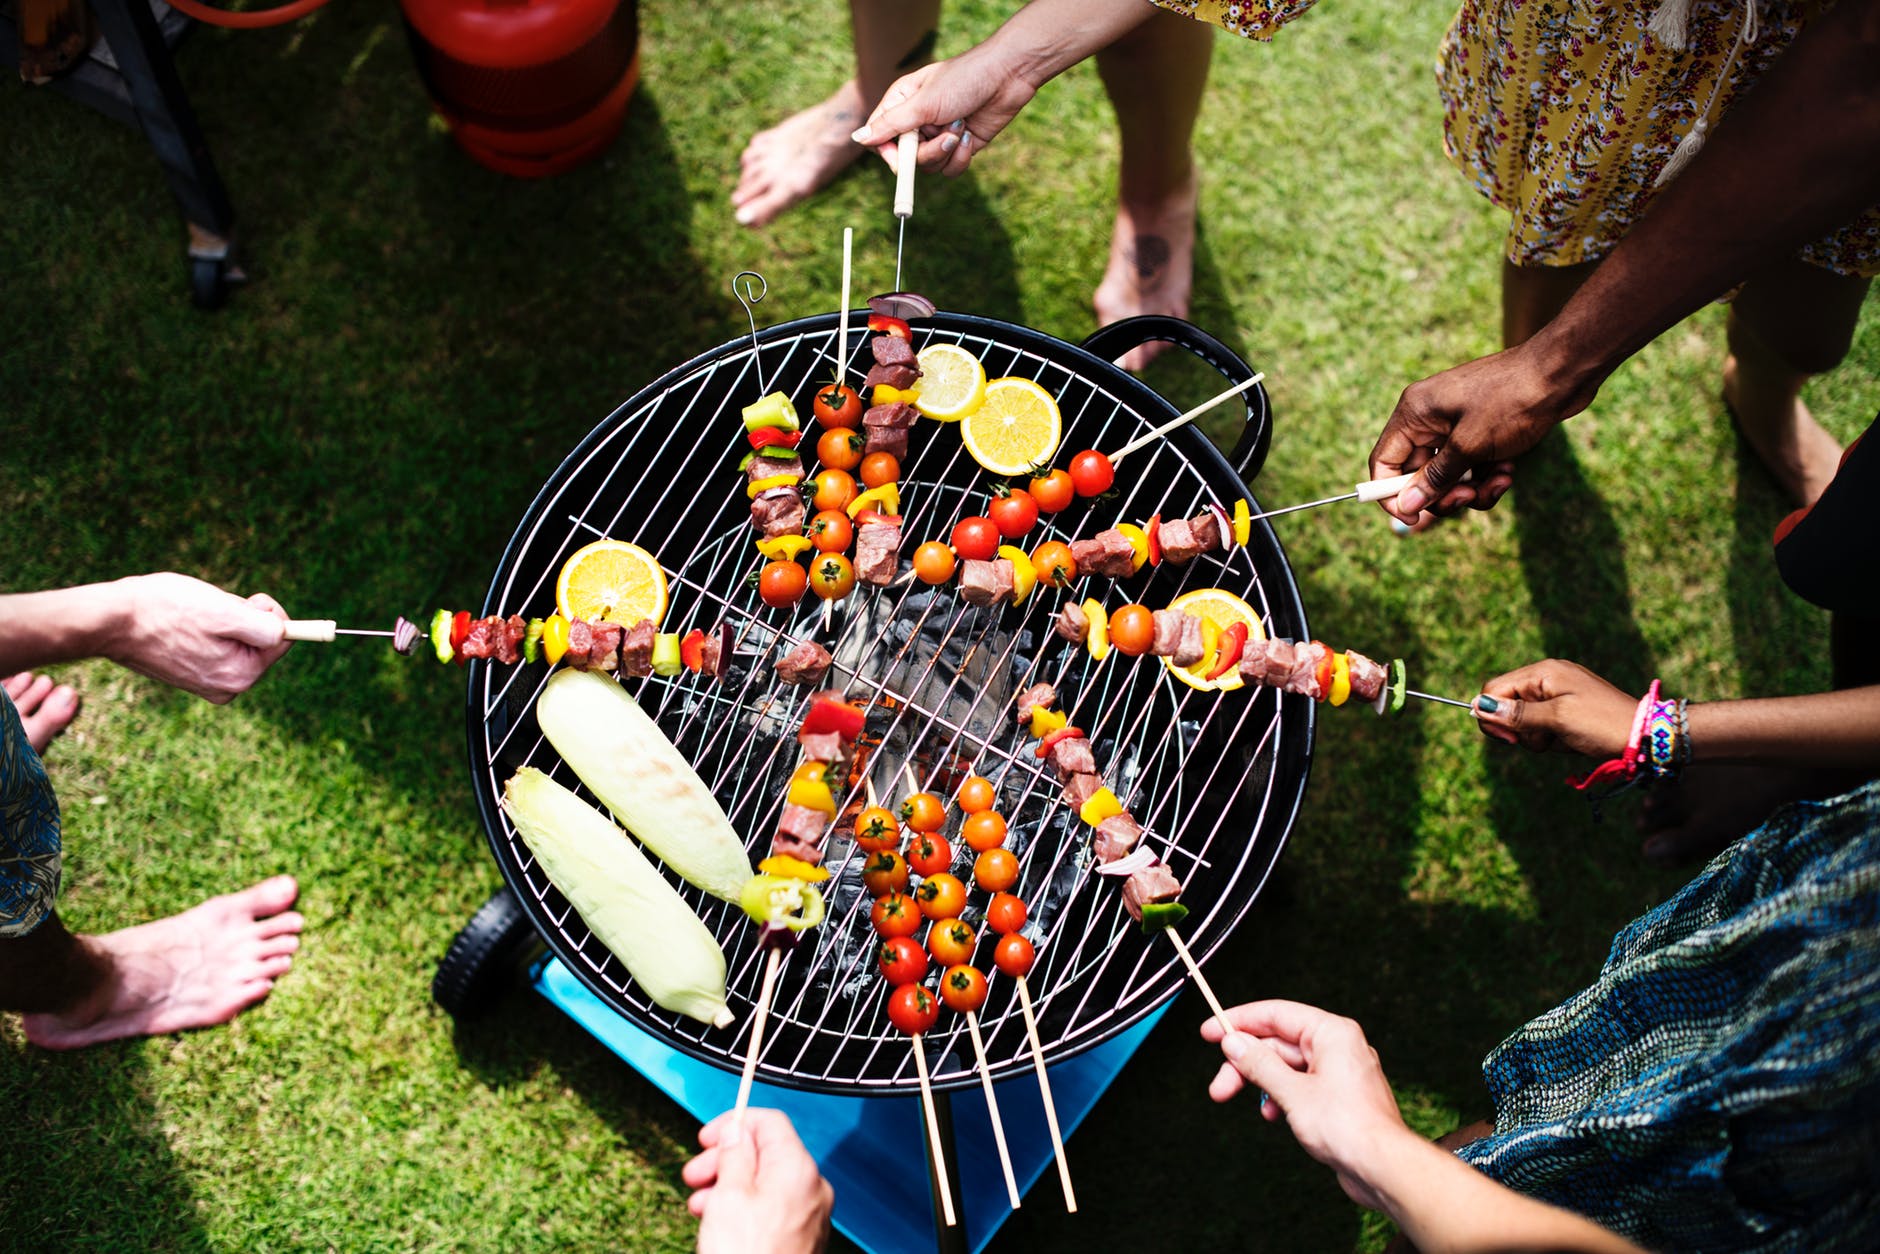 people barbecuing meat on a portable grill